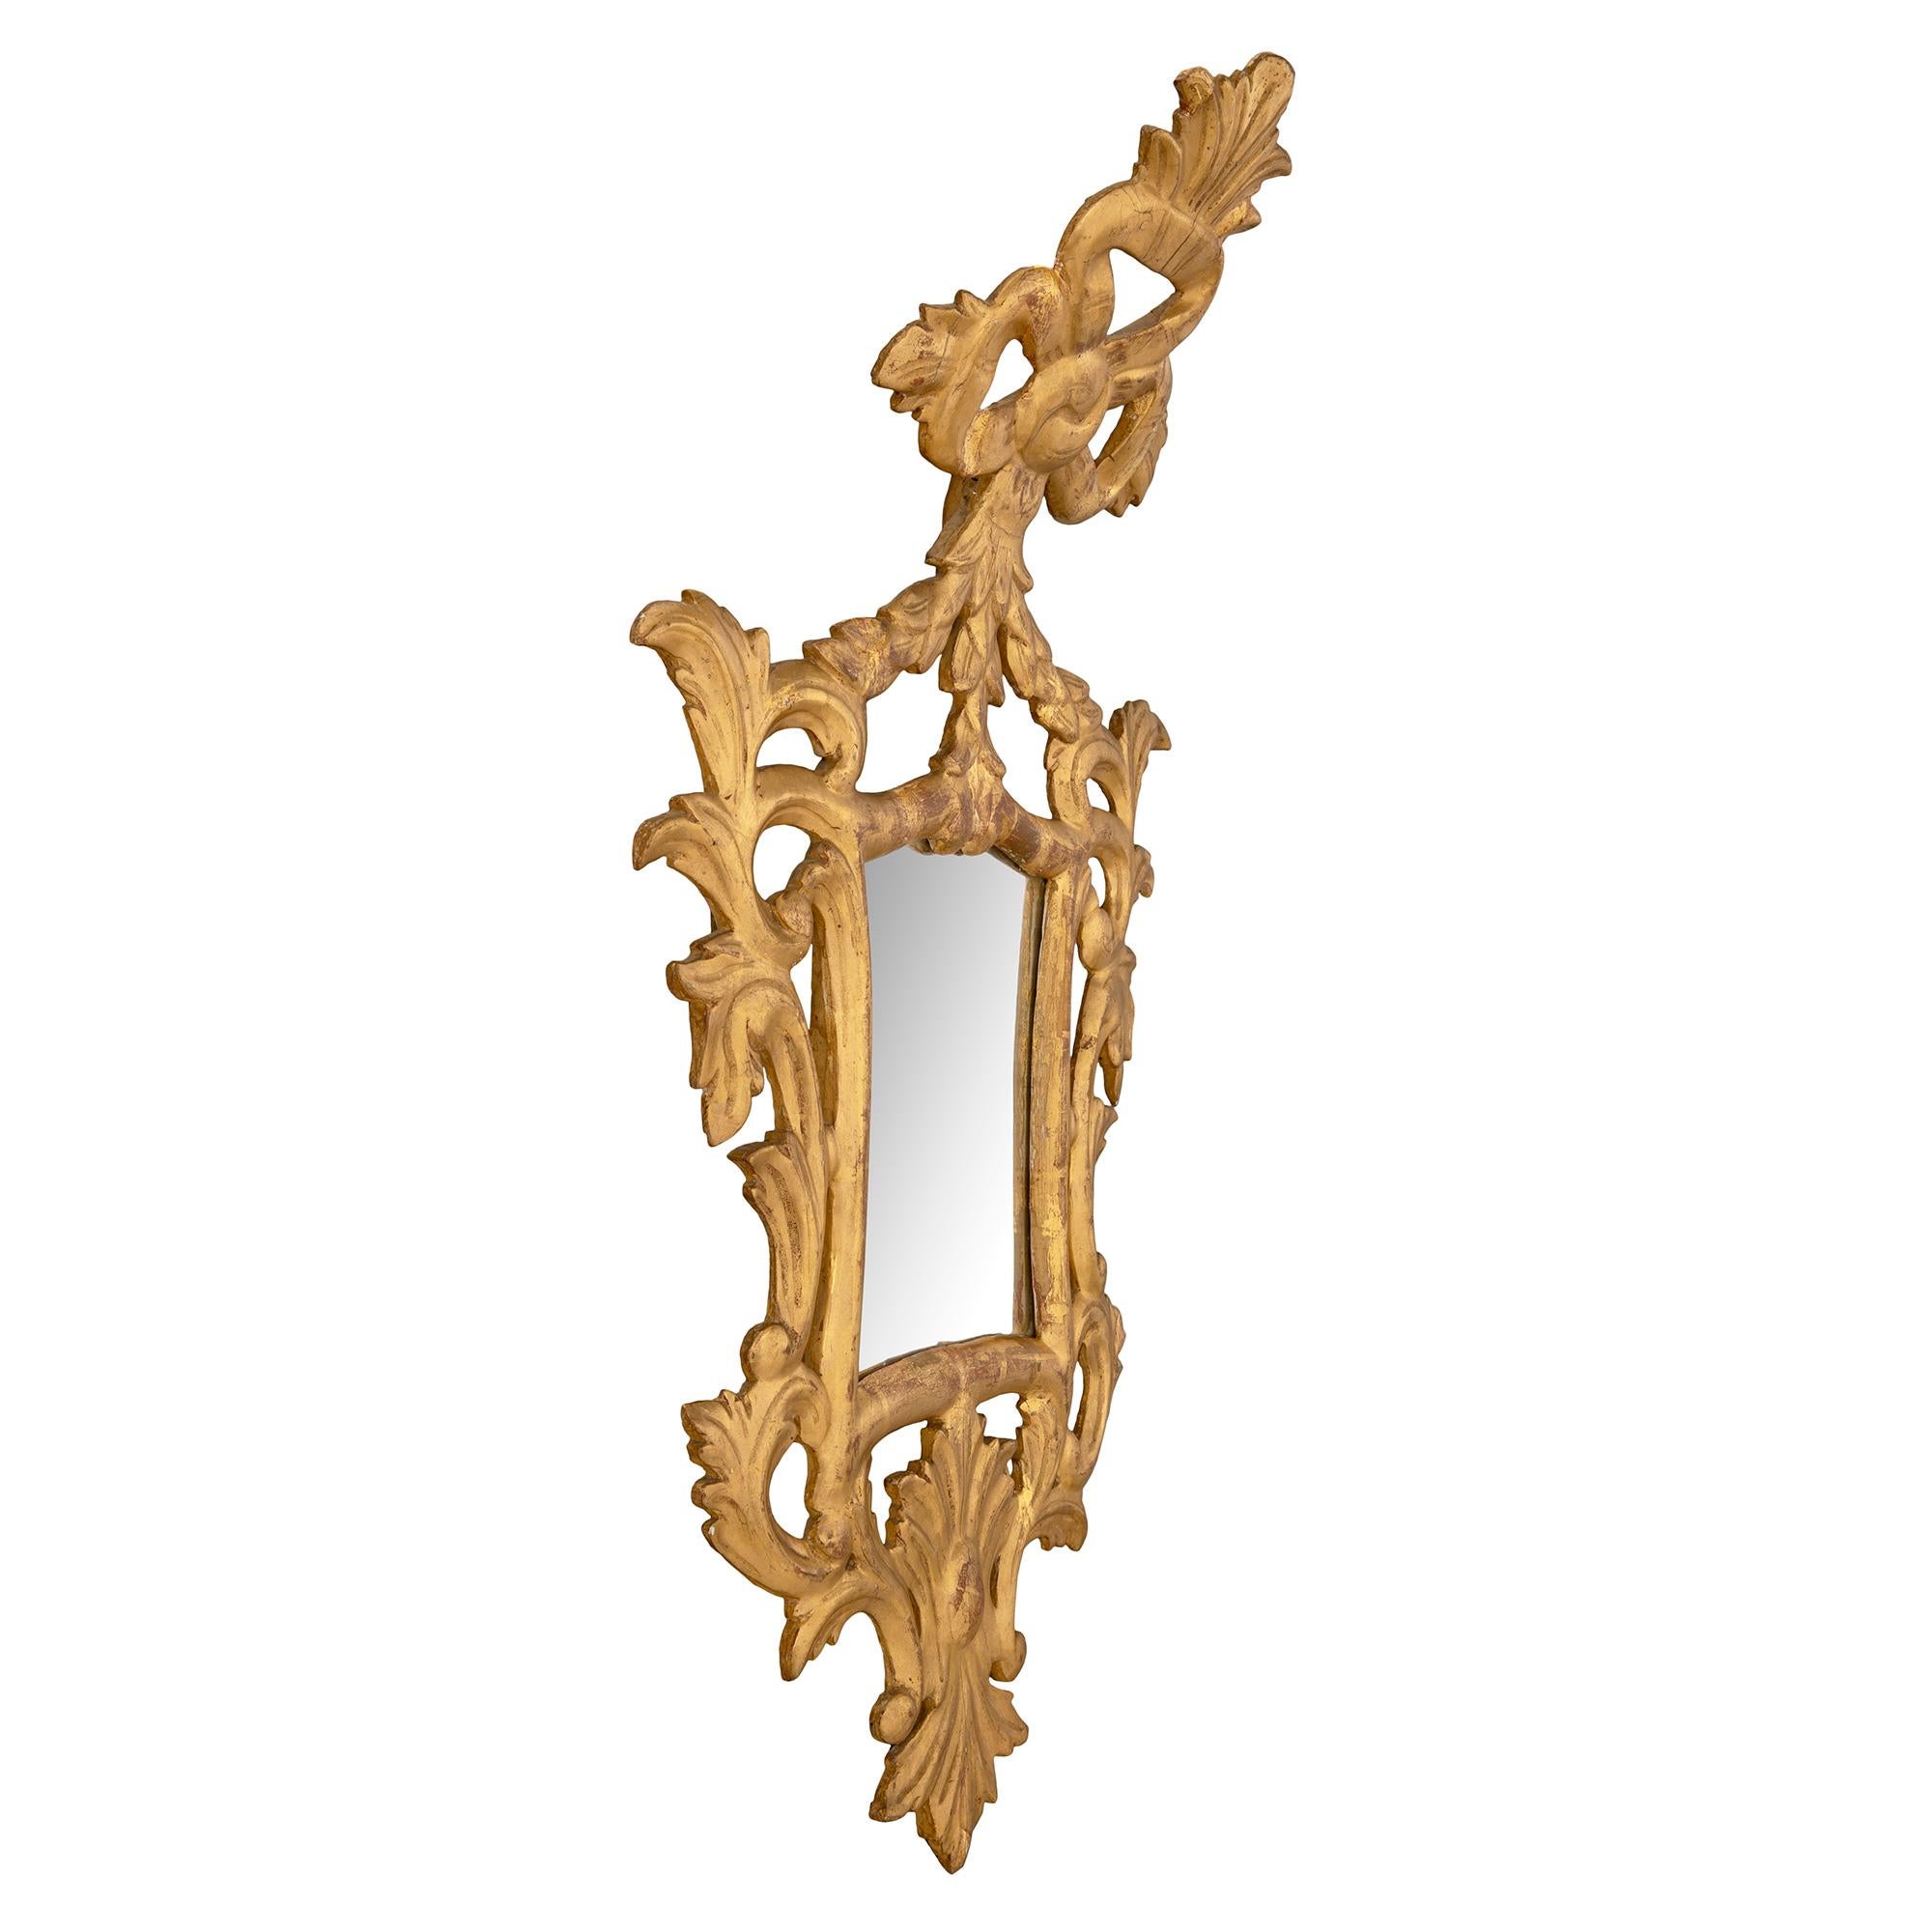 A most attractive pair of Italian mid 18th century Baroque st. giltwood mirrors. Each Venetian mirror retains its original mirror plates framed within a lovely mottled border. Below are the elegant smooth cabochons amidst acanthus leaves while